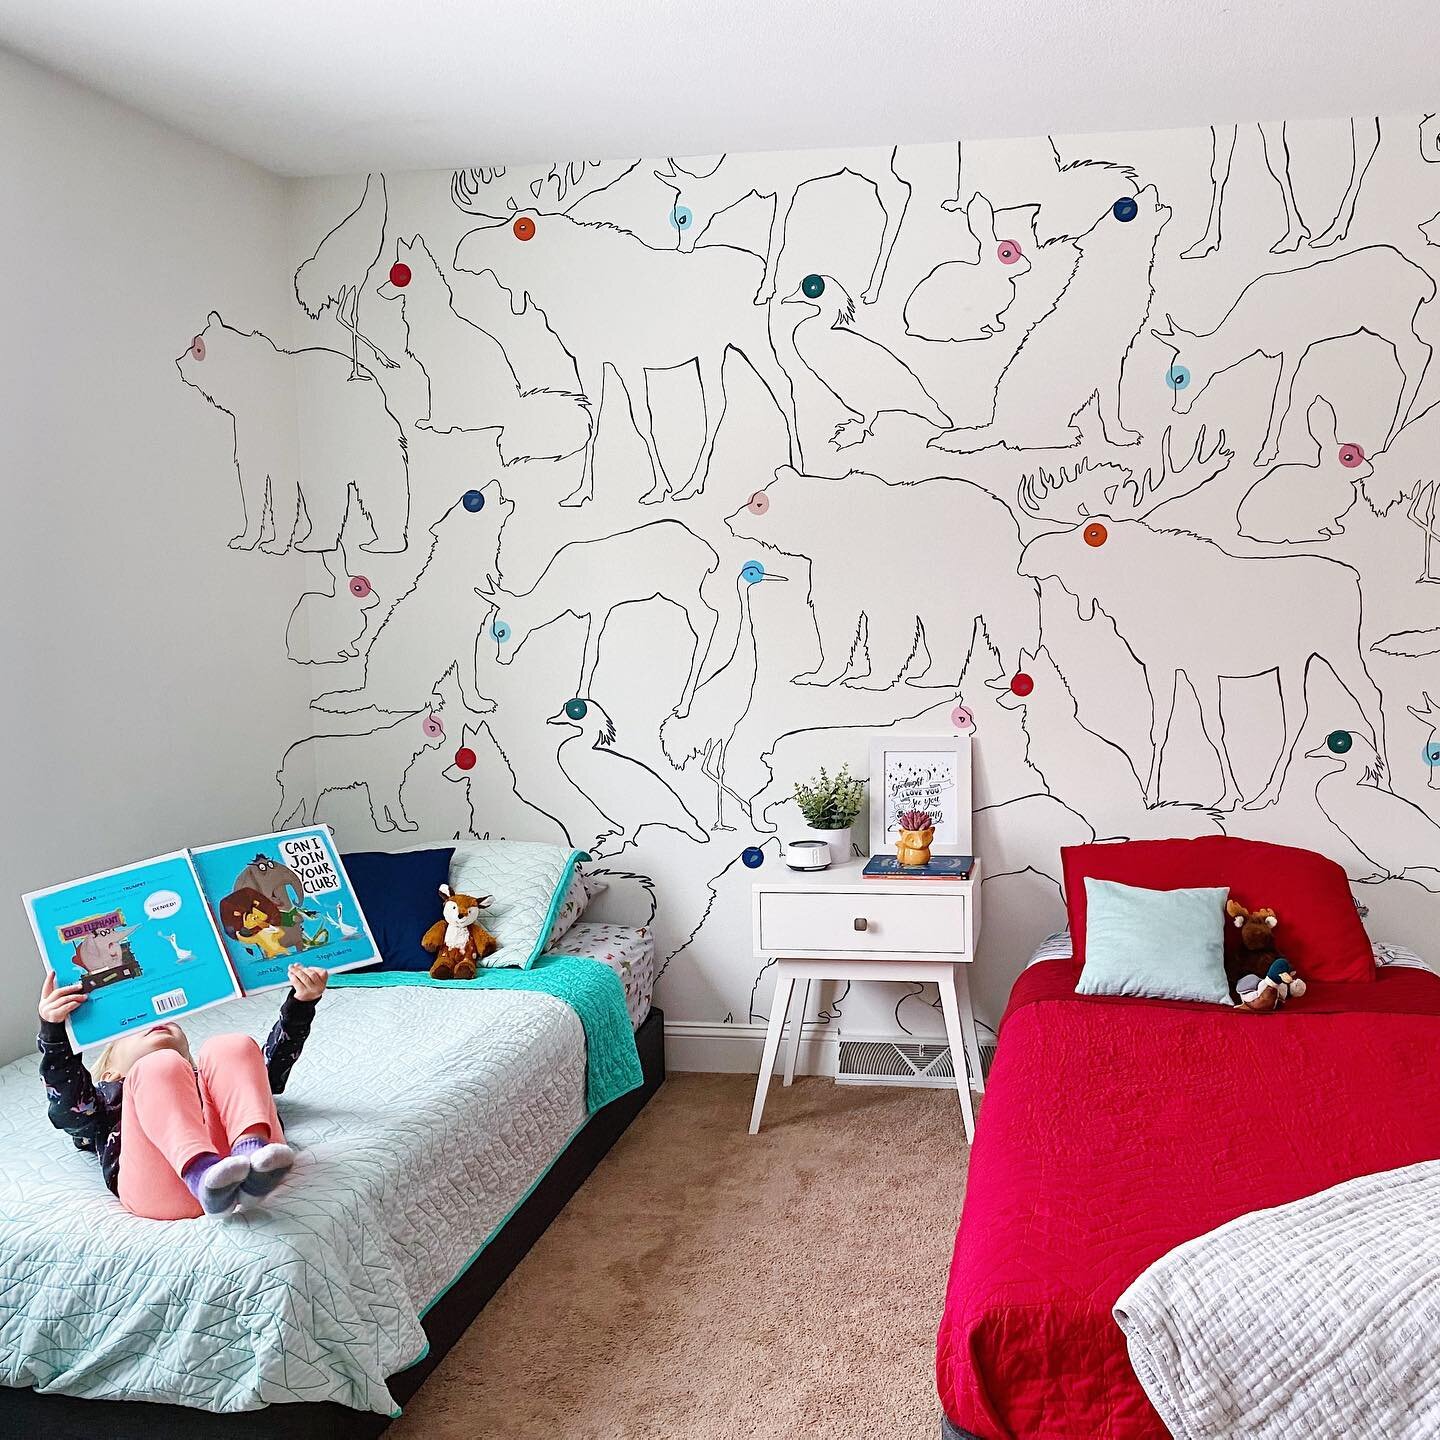 This mural was a huge labor of love. It took me an embarrassing amount of hours to illustrate, design, transfer and paint, but man I&rsquo;m in love! The kiddos absolutely love it! They tell me nightly how much they love sleeping with all these anima